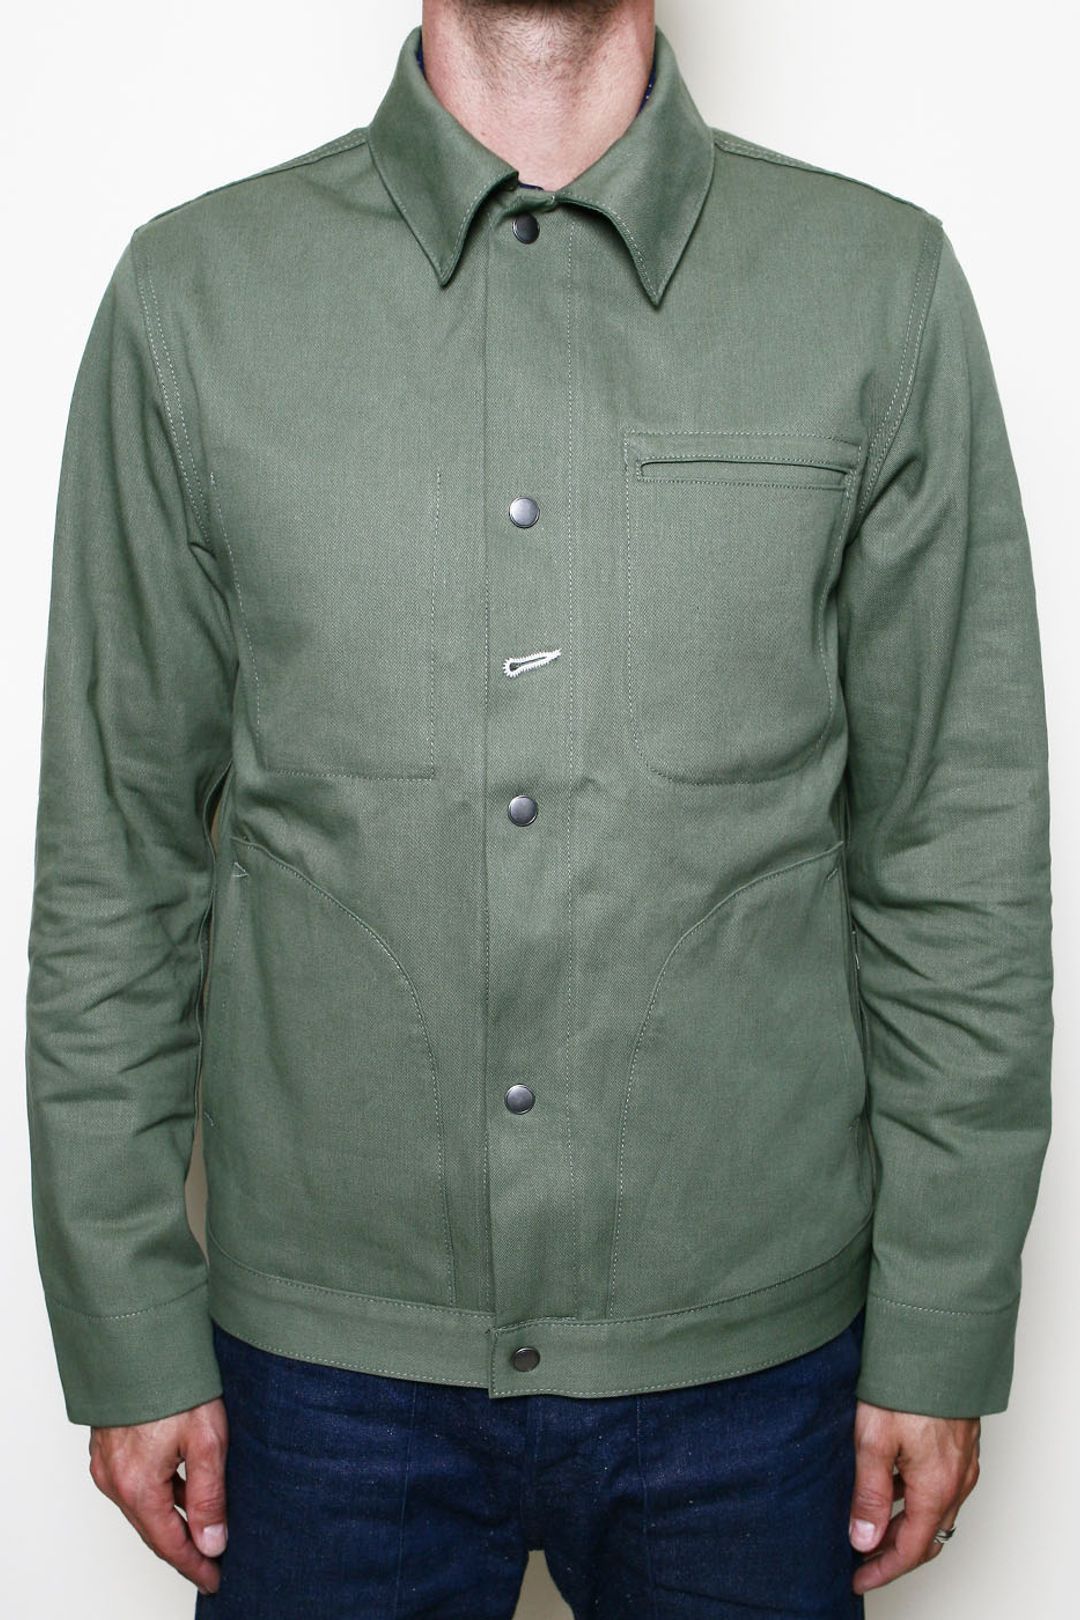 Rogue Territory Rogue Territory Supply Jacket / Olive Selvedge Twill XL ...